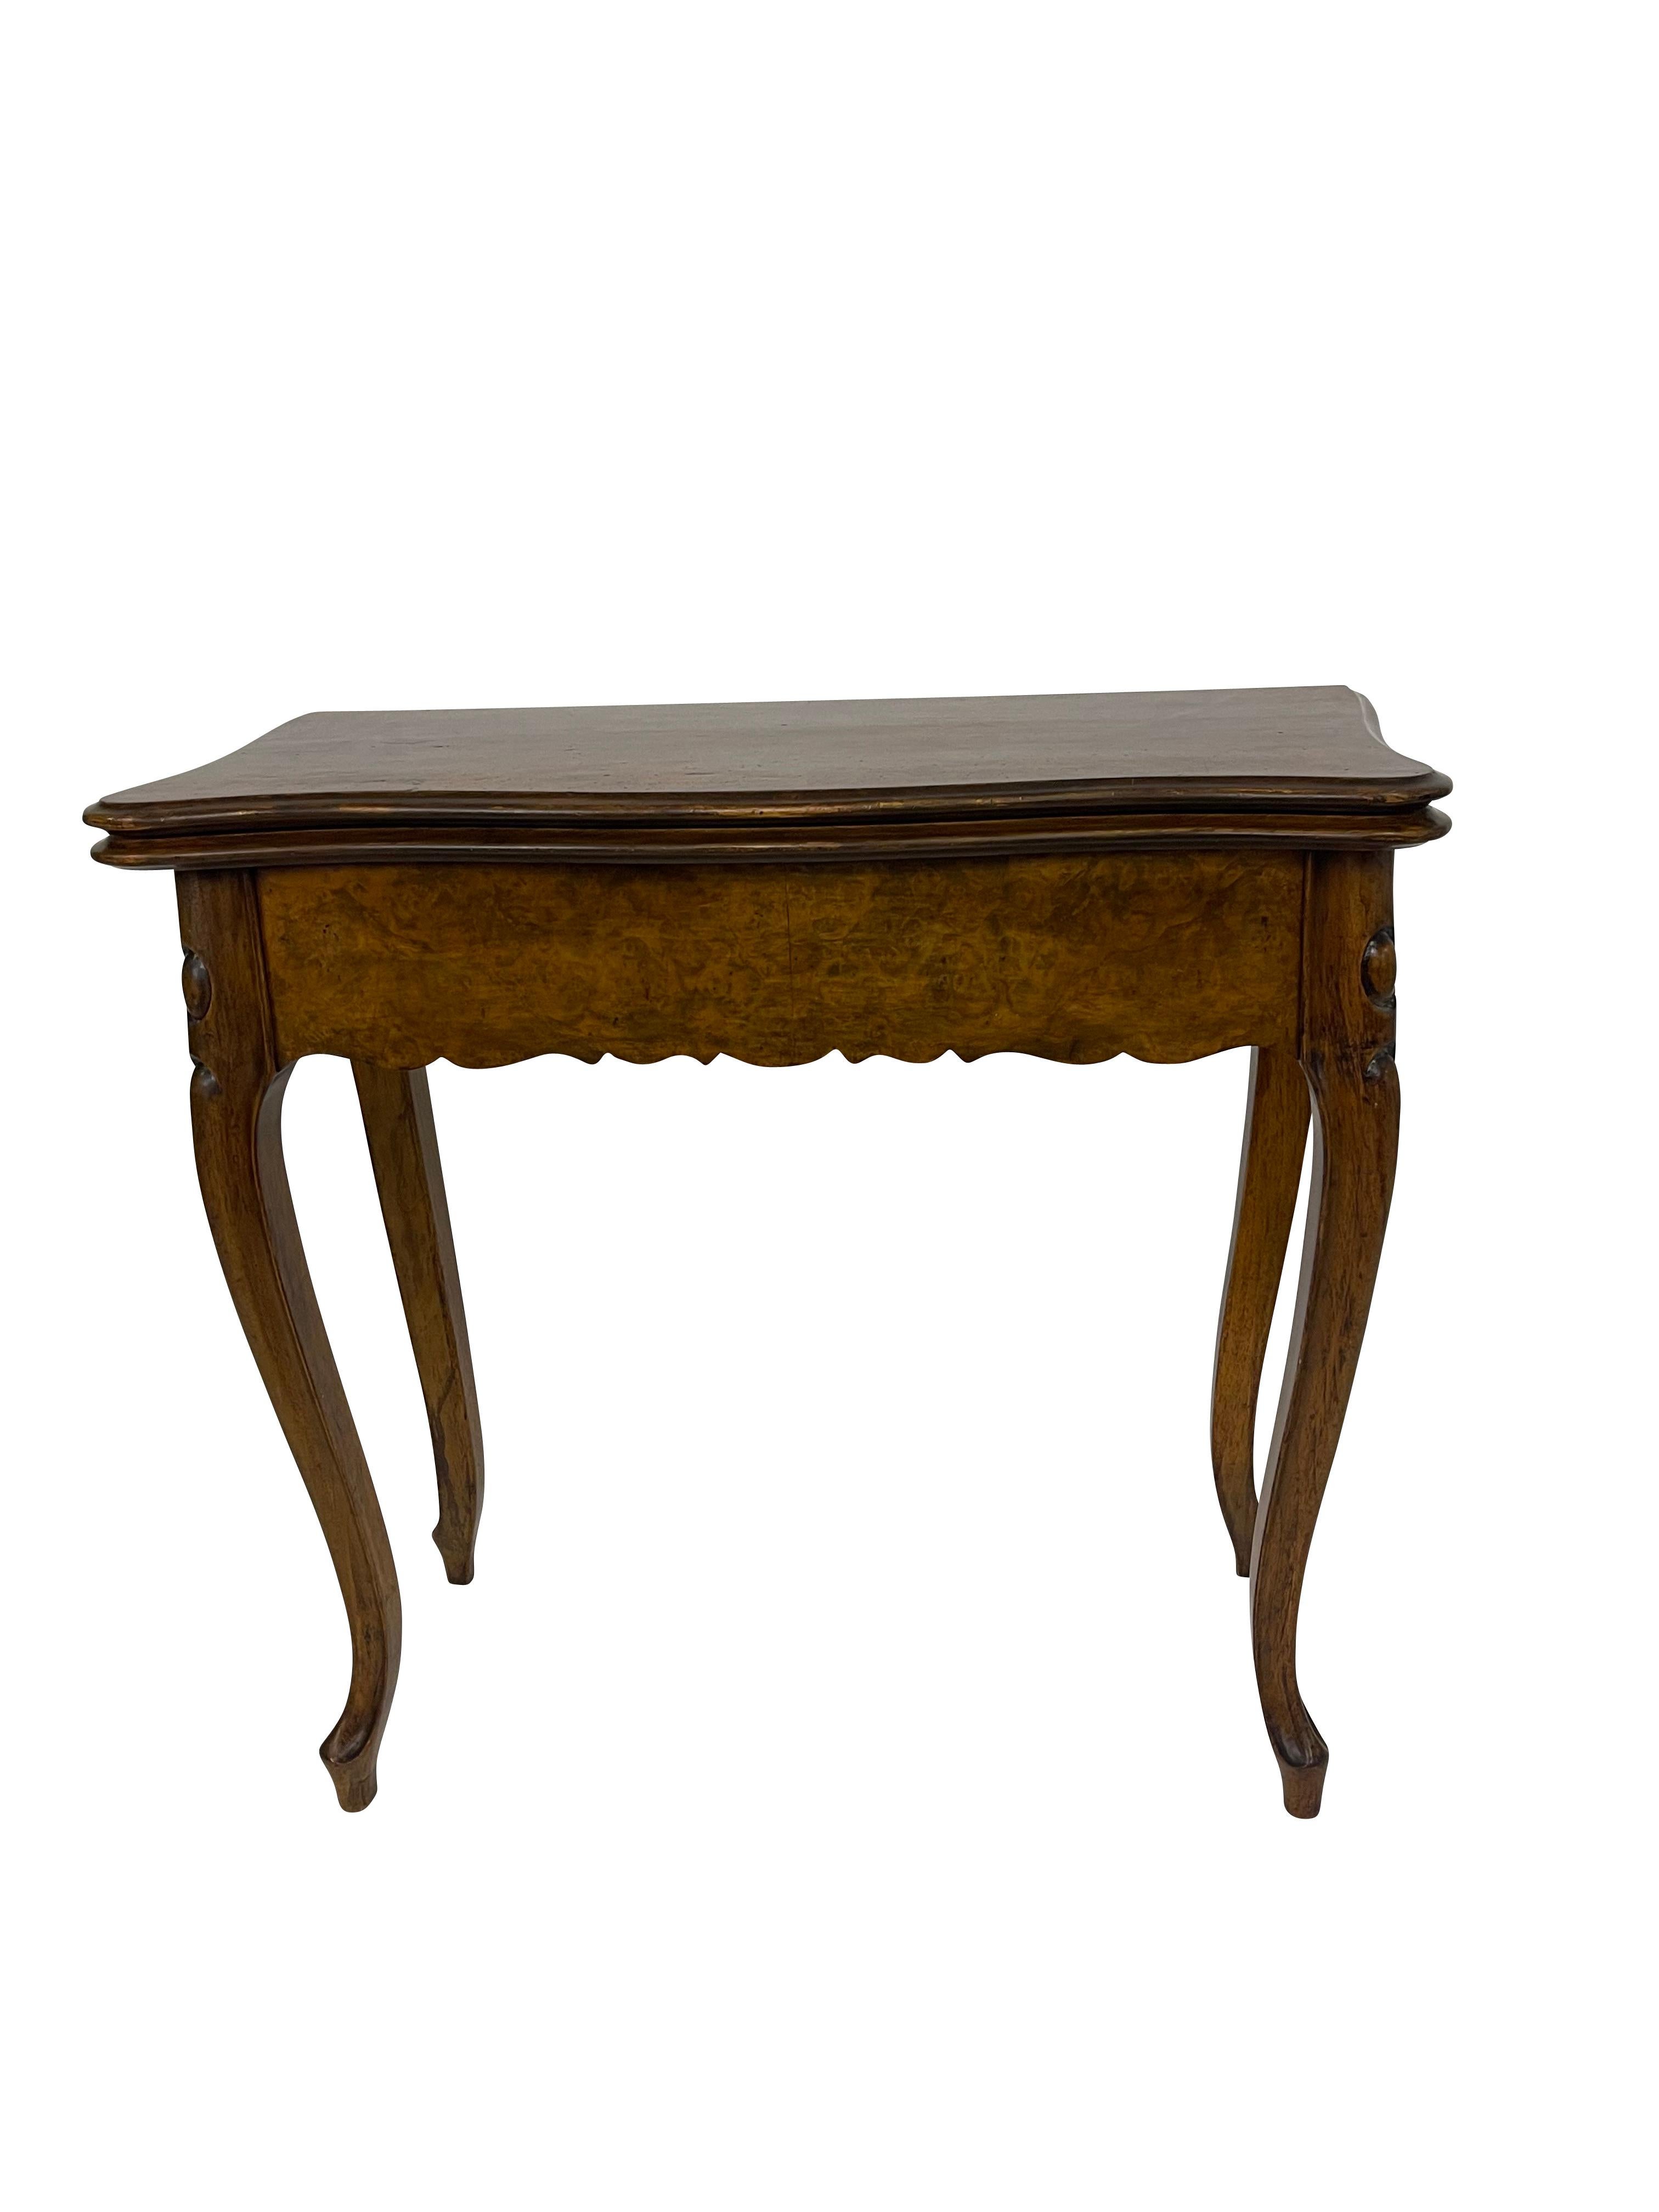 ROCOCO REVIVAL BURL WALNUT GAMES TABLE English, Mid to late 19th Century. The serpentine hinged top swivels and opens to a baize-lined playing surface, above a scalloped skirt, on cabriole legs ending in pointed-shaped feet—lightweight, compact